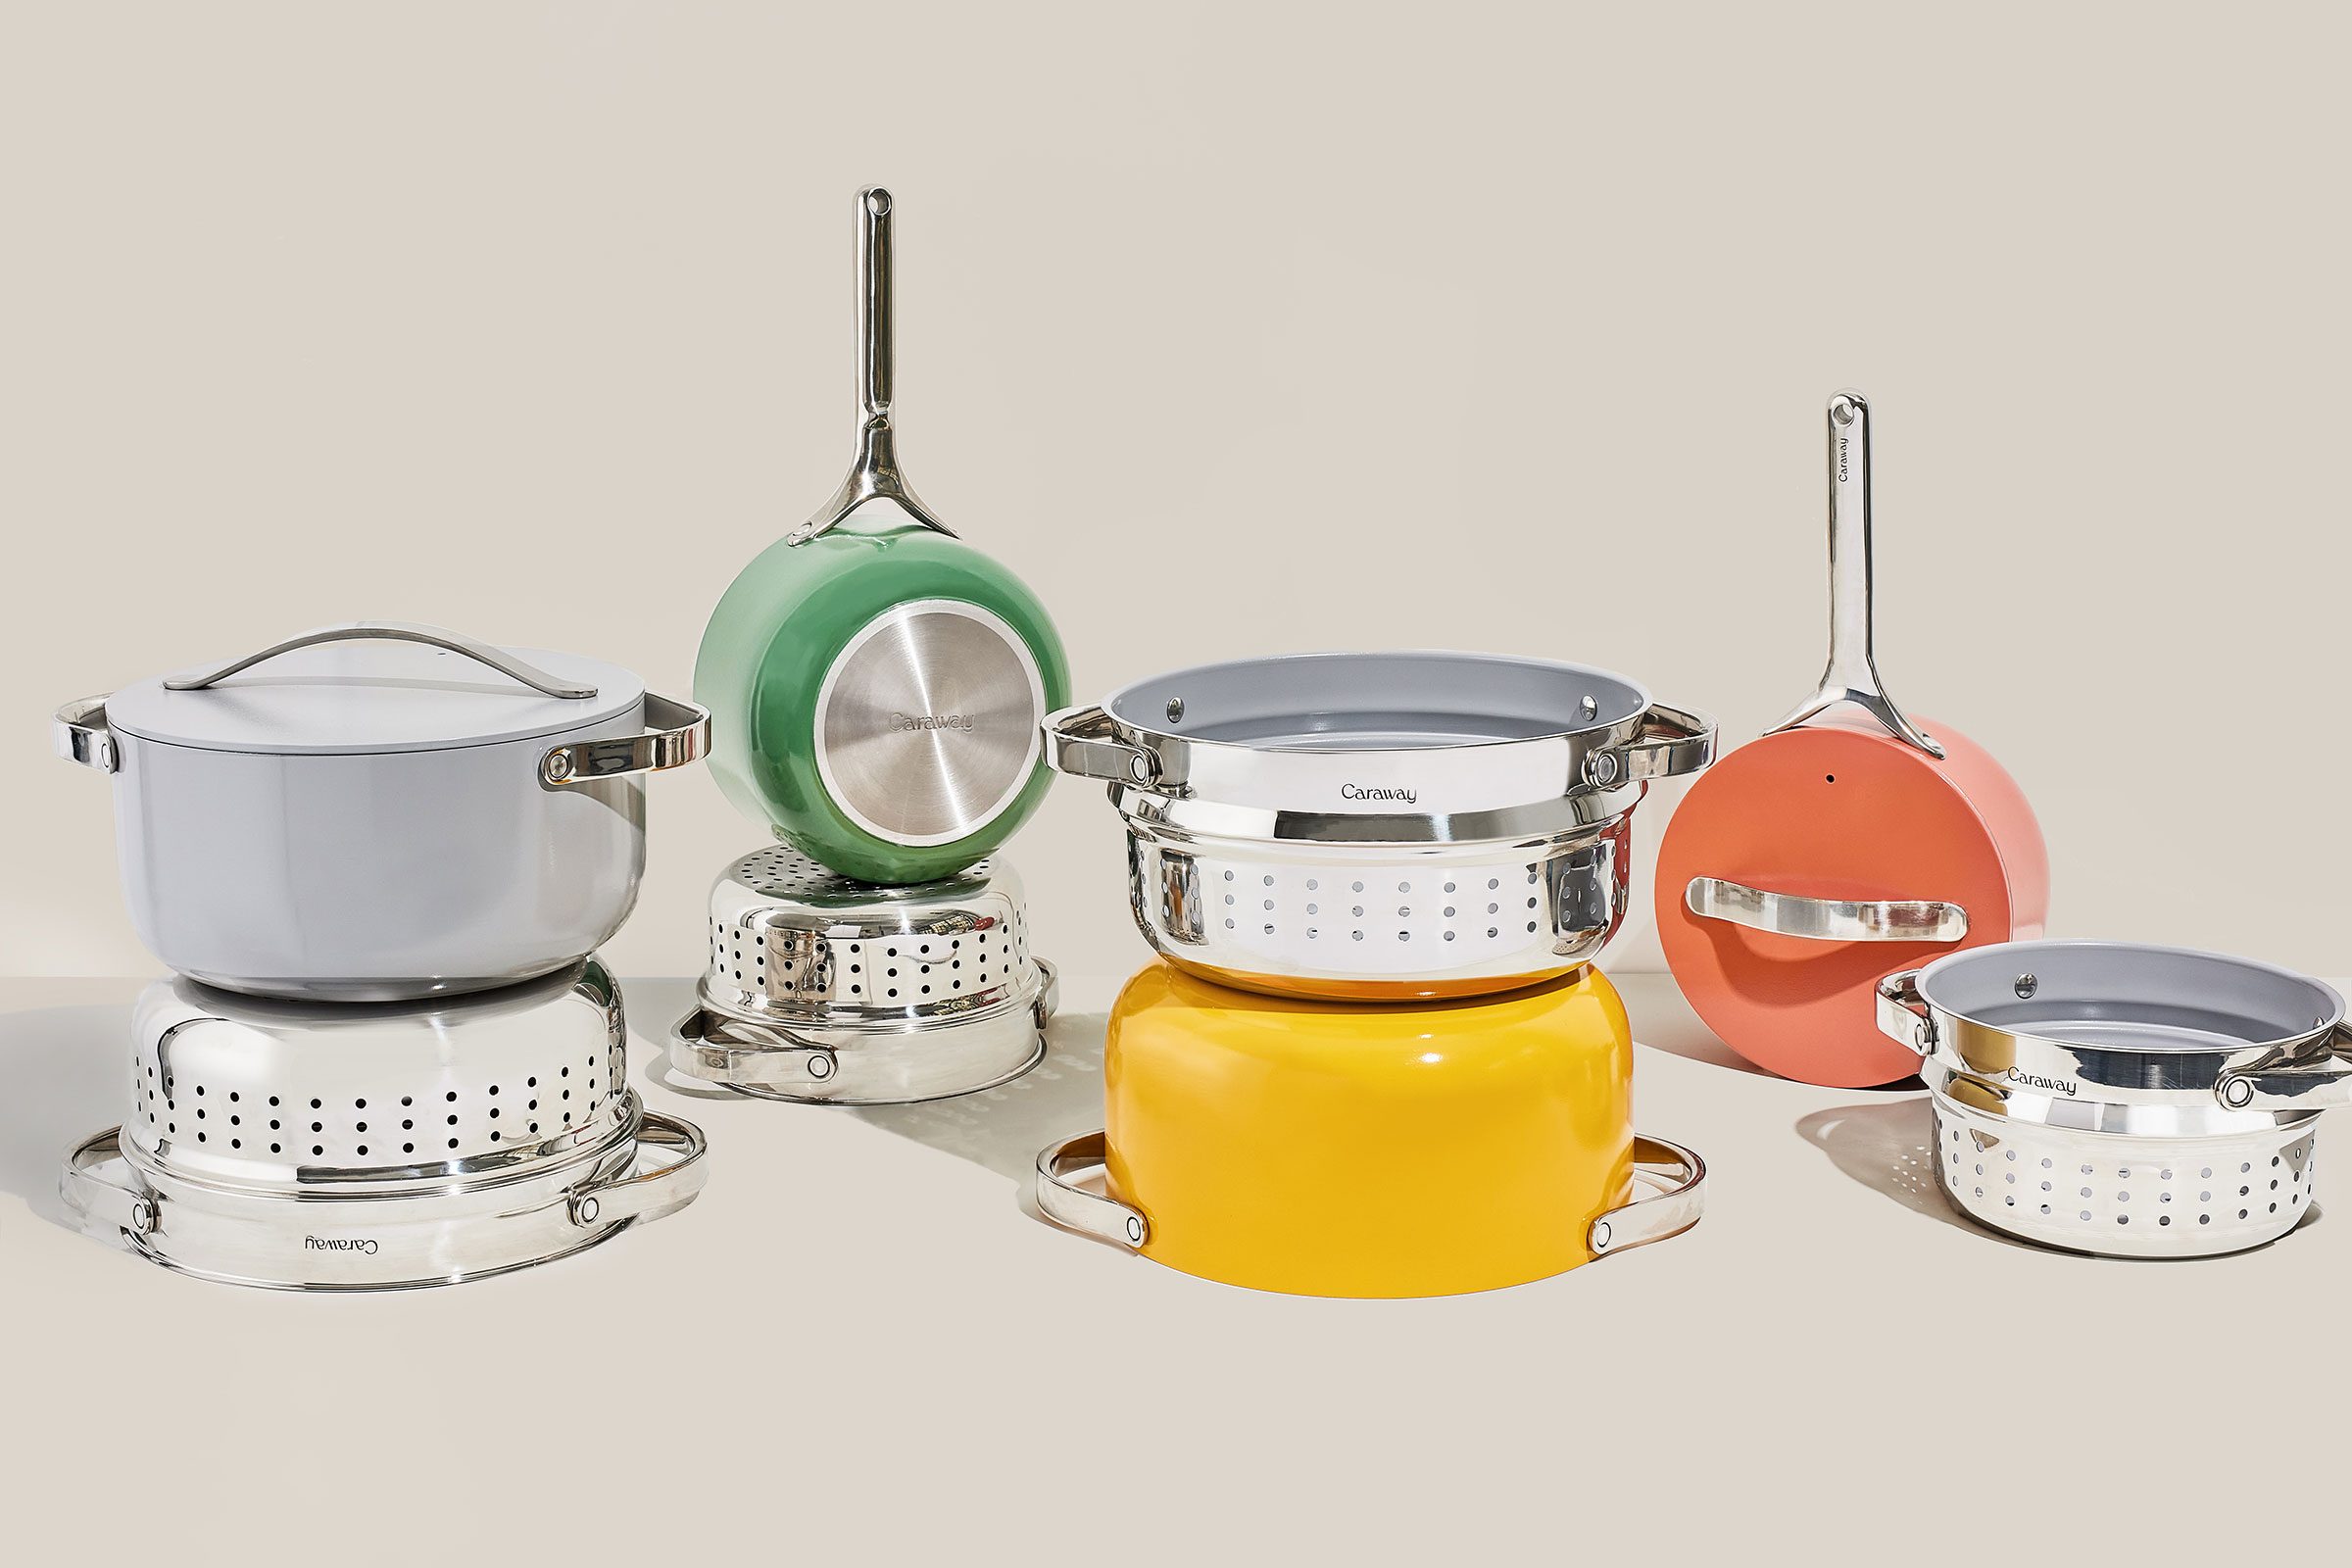 Caraway cookware launches first line of bakeware